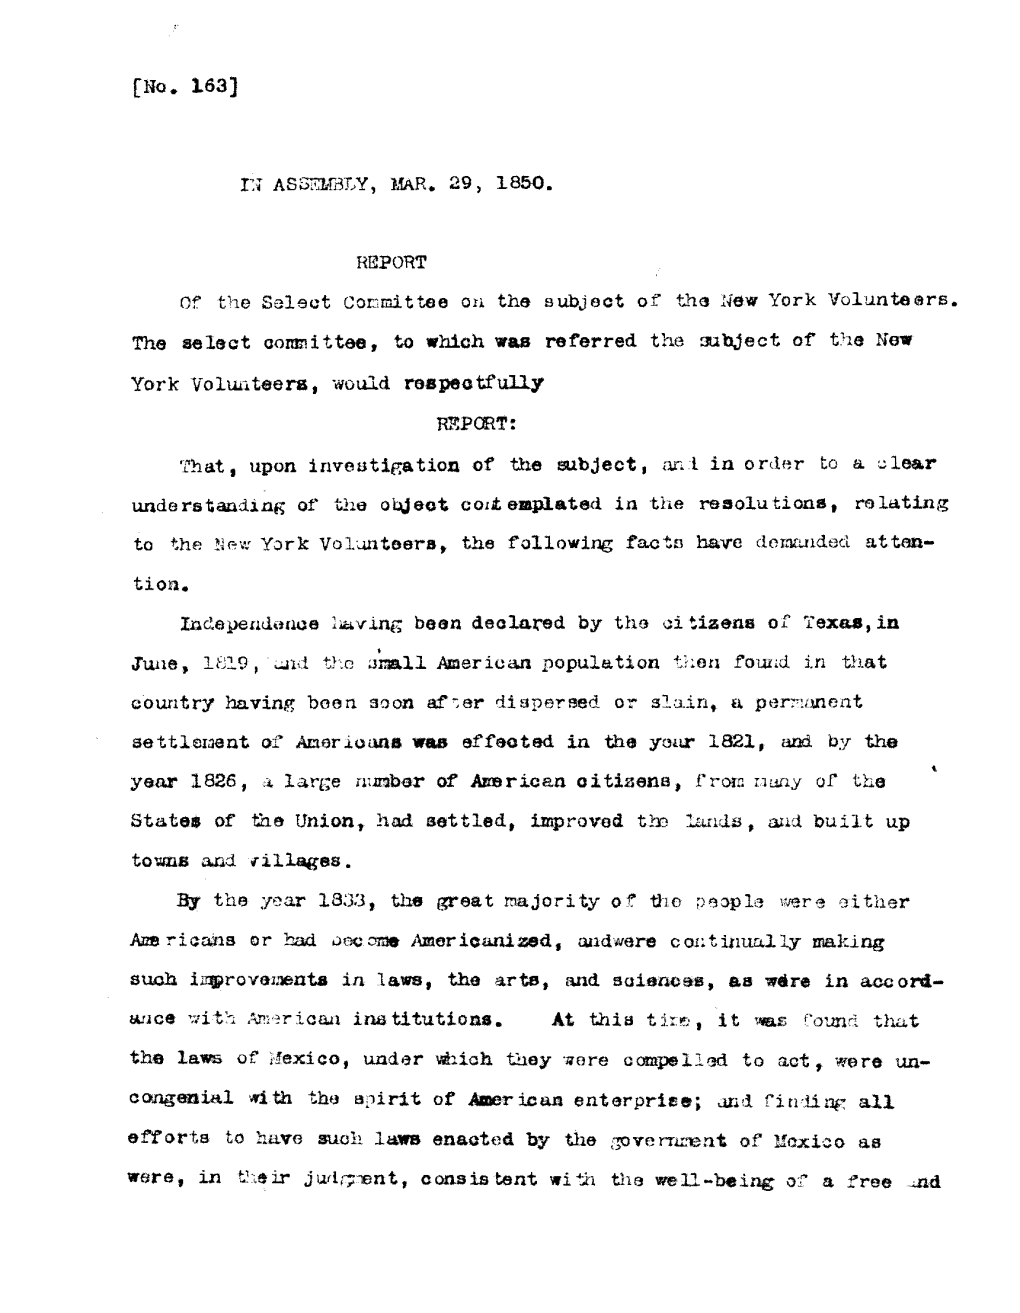 Report of the Select Committee on the Subject of the New York Volunteers